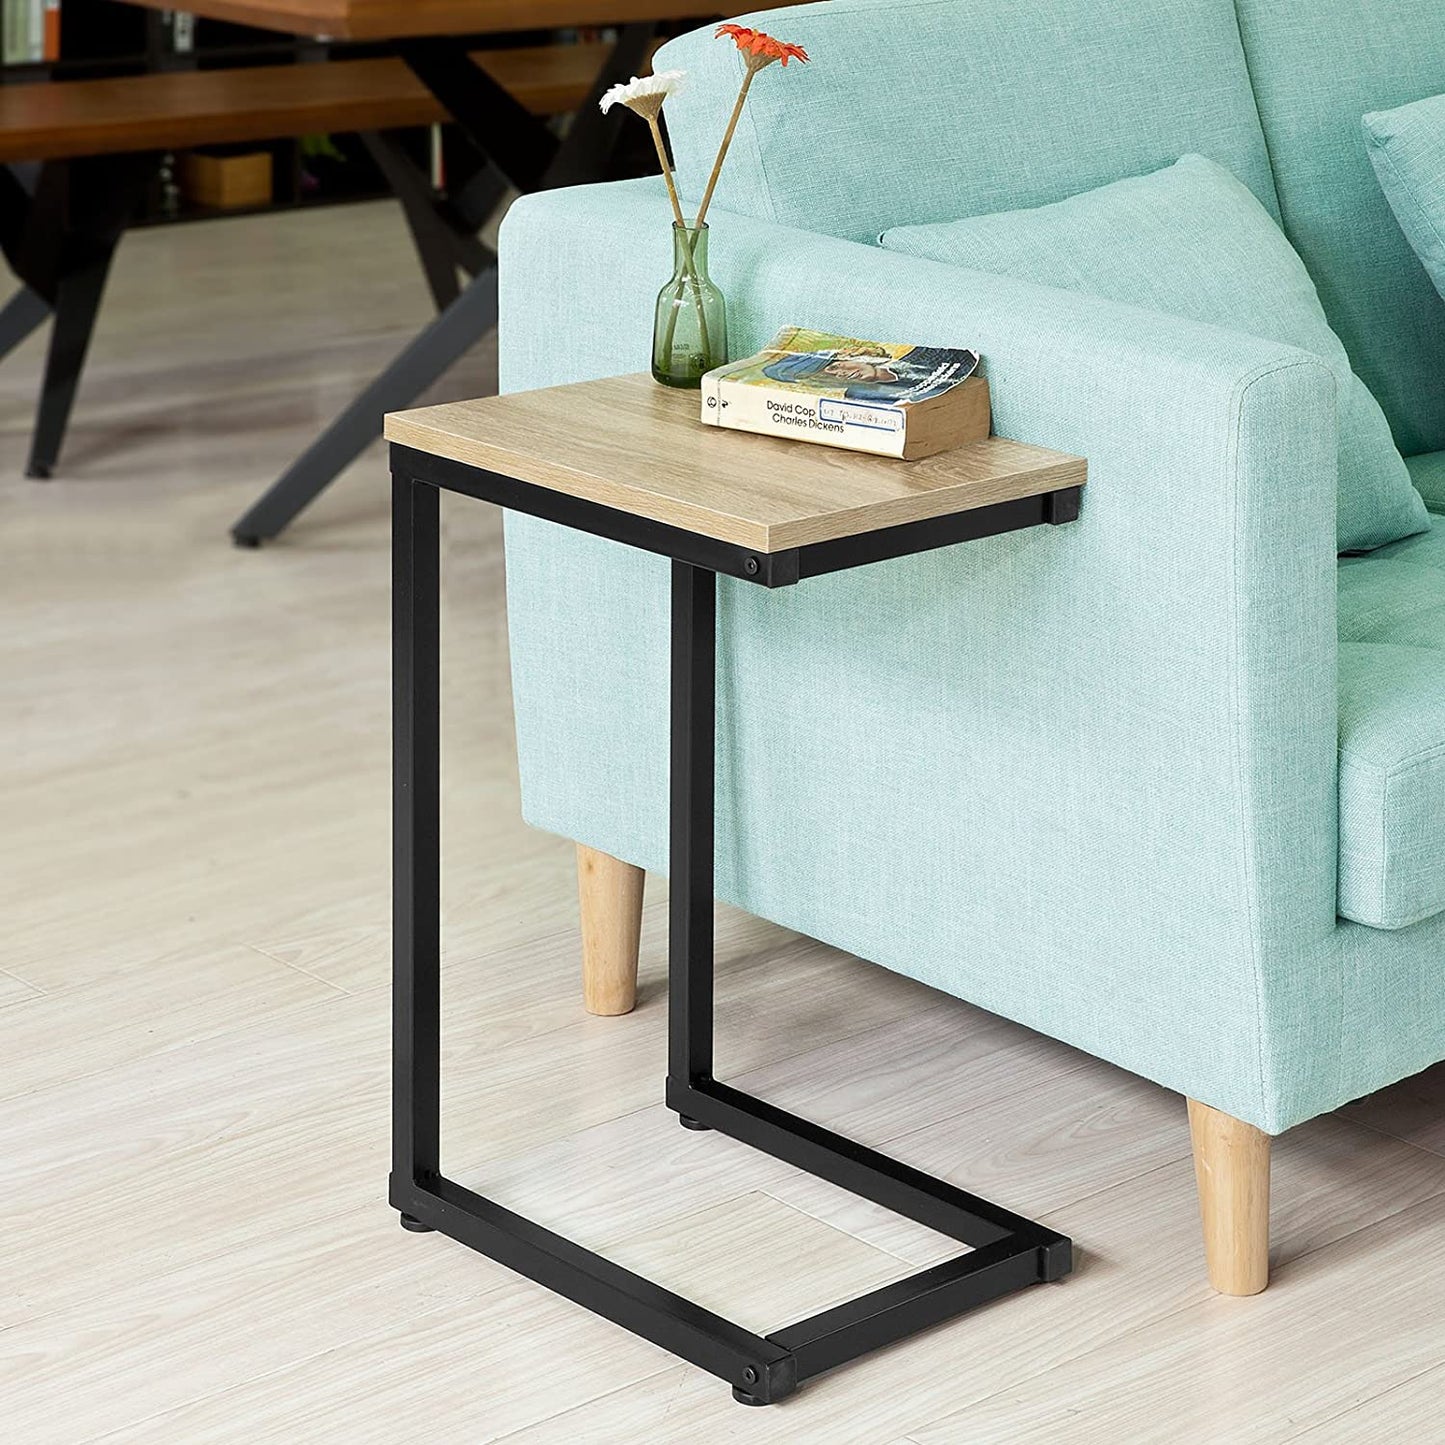 Sofa Side Table for Coffee time - image5